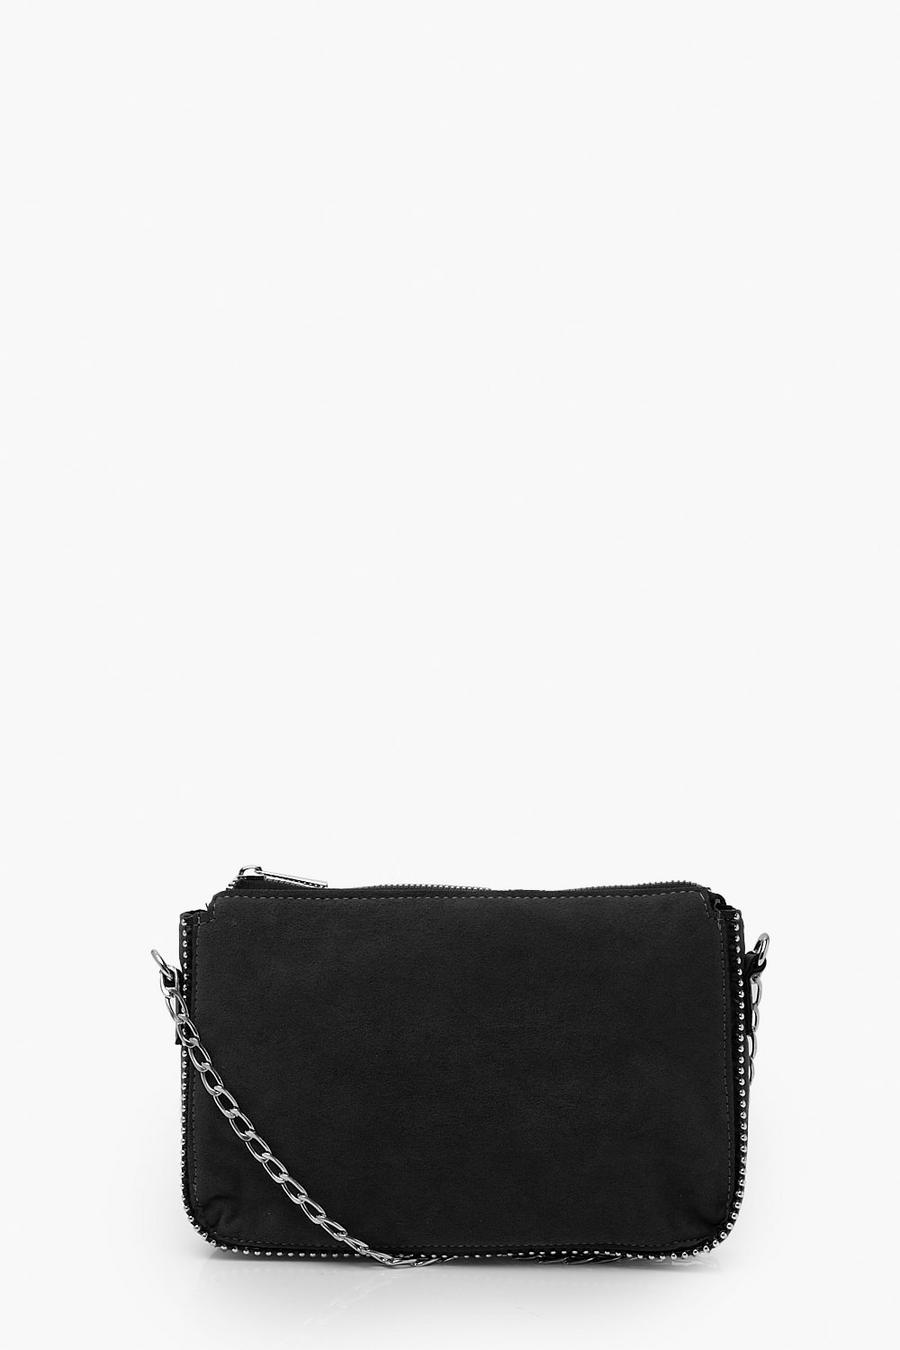 Black Suede Clutch With Ball Stud Detail image number 1